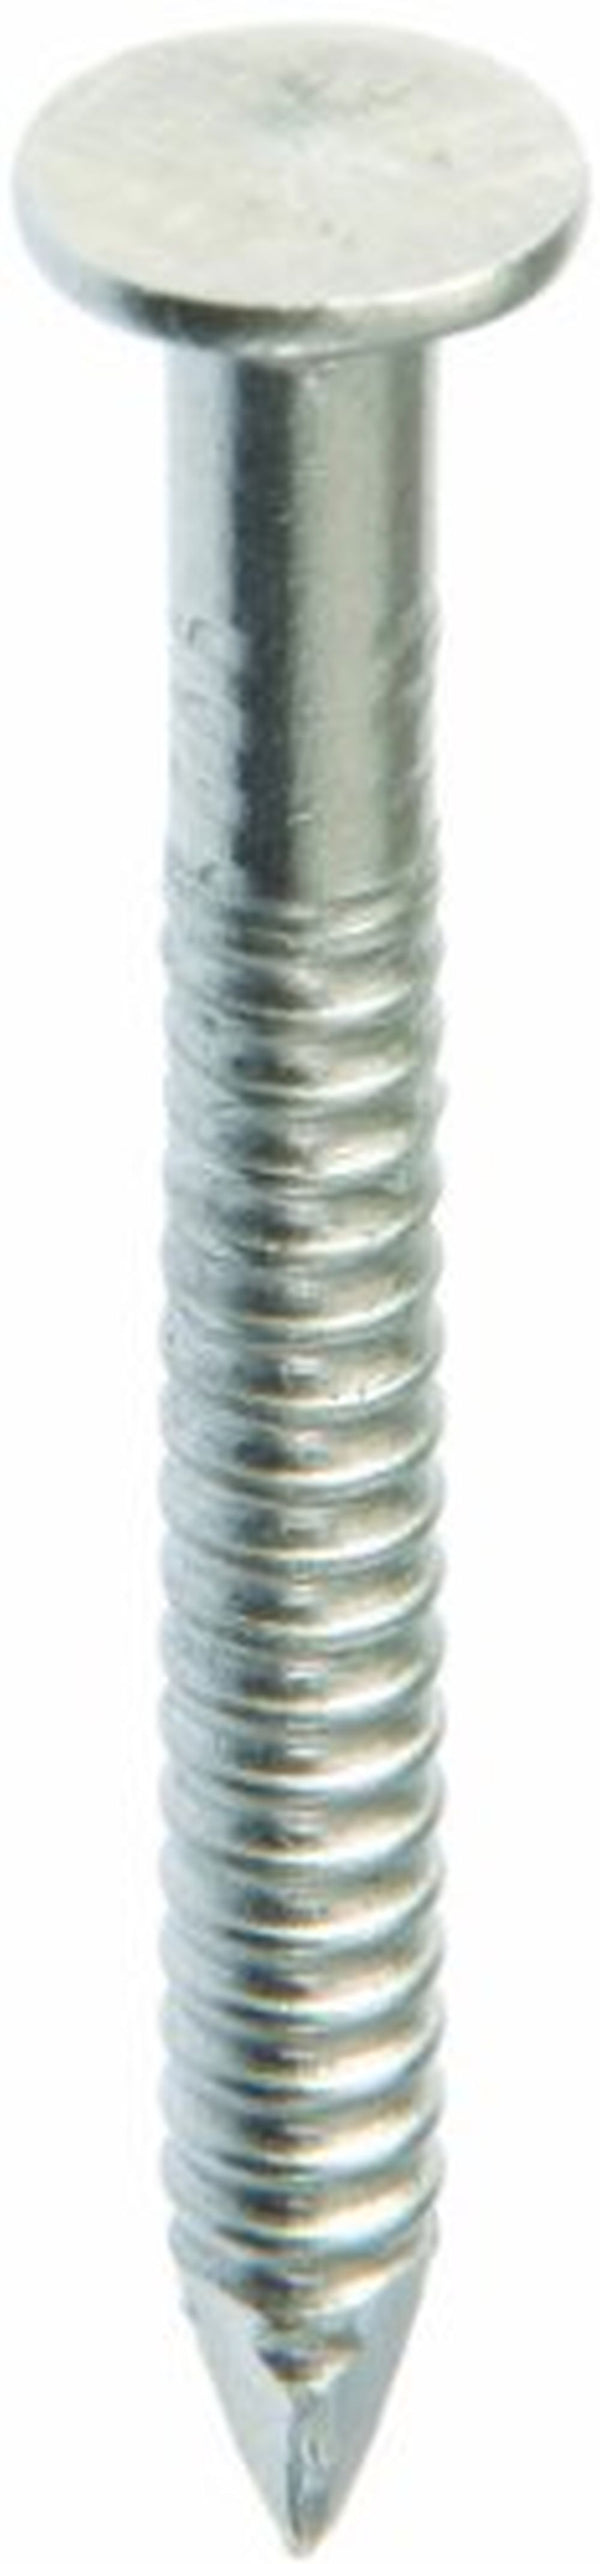 Grip Rite MAXN134RSRFG304BK 1-3/4 in. 5D 304 Stainless Steel Roofing Nail (25 lbs. Pack)